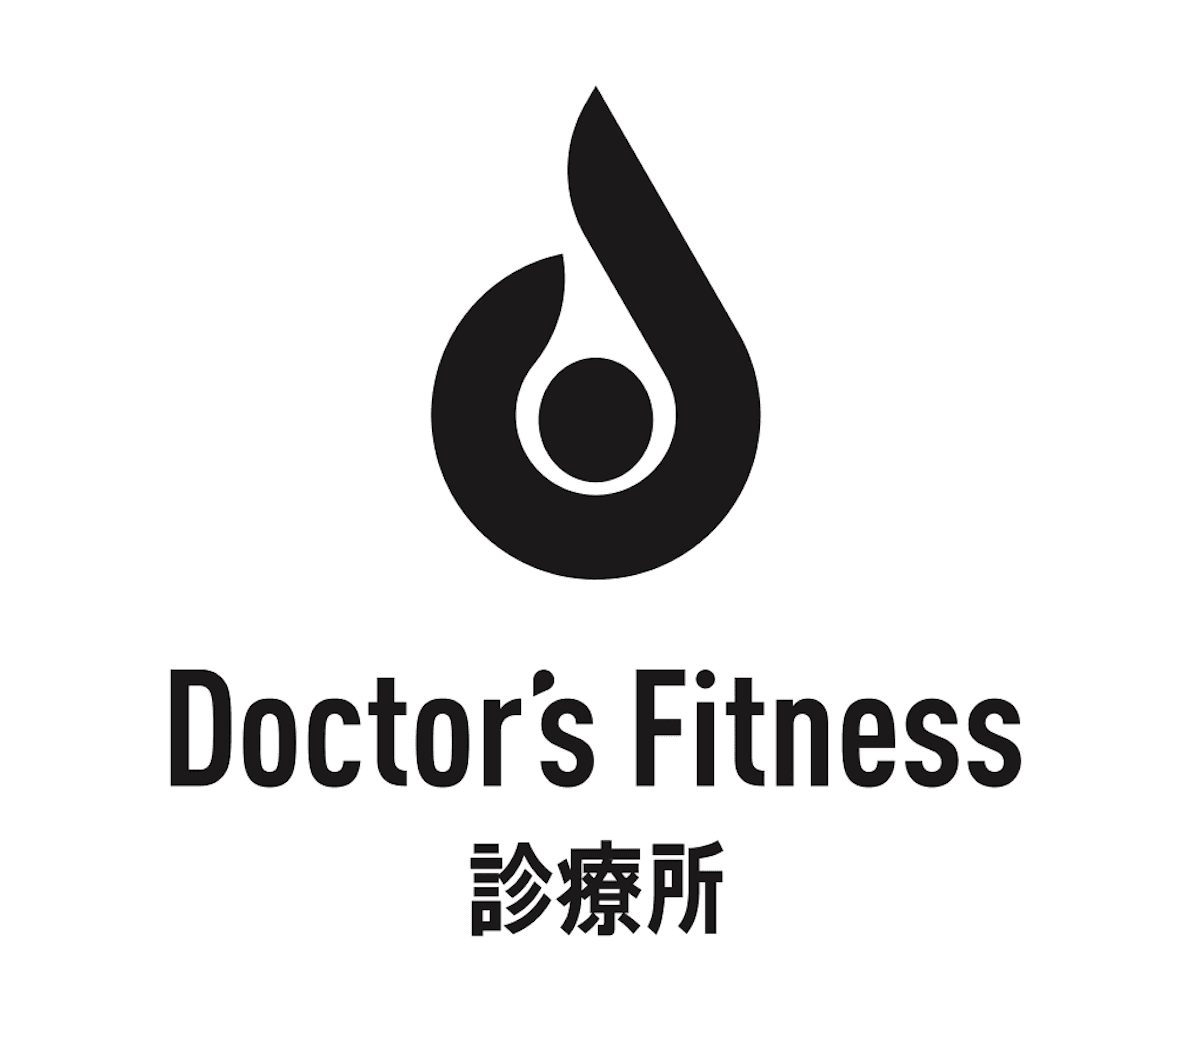 Doctor's Fitness 診療所のロゴ画像